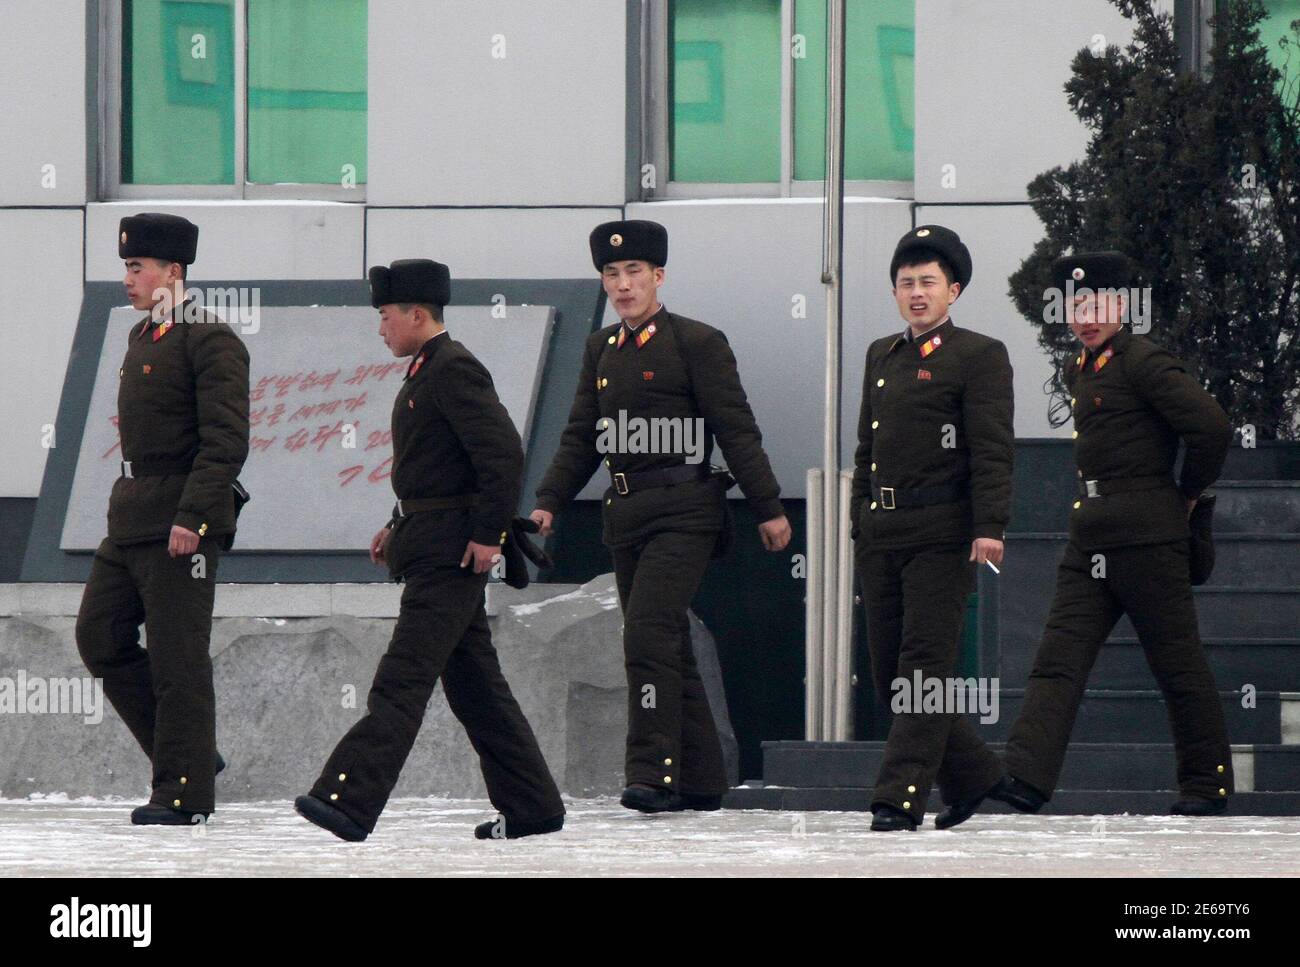 North Korean soldiers walk in front of a building on the banks of Yalu River, near the North Korean town of Sinuiju, opposite the Chinese border city of Dandong, January 20, 2014. North Korea demanded that South Korea and the United States halt annual military drills due in February and March, saying they were a direct provocation, a statement that suggested a re-run of a sharp escalation in tension last year. REUTERS/Jacky Chen (NORTH KOREA - Tags: MILITARY POLITICS) Stock Photo